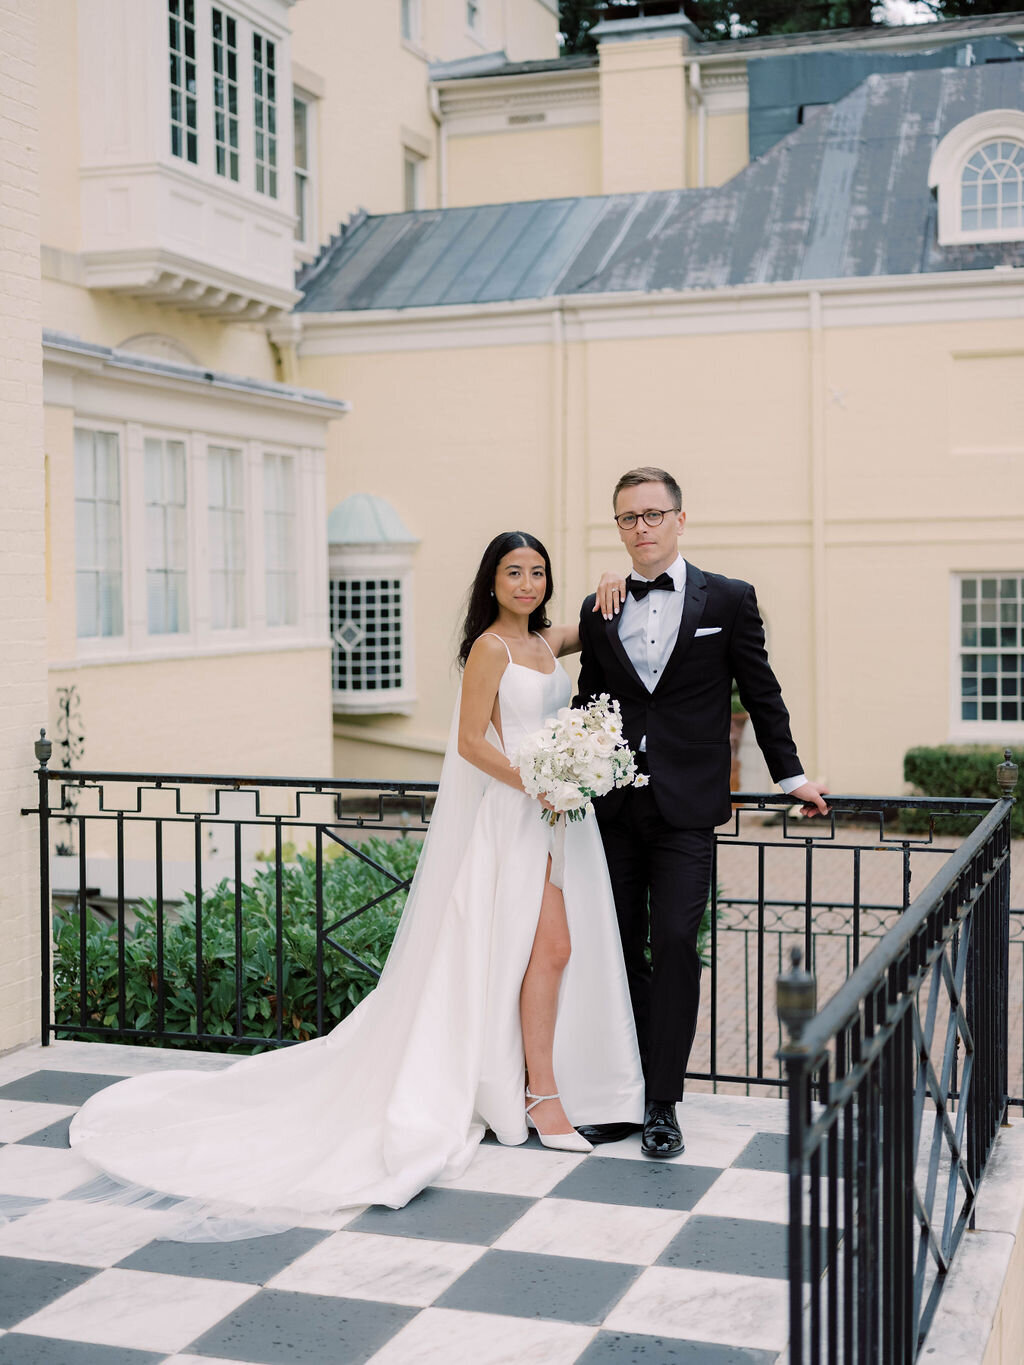 Portrait of the bride and groom at the Evergreen Museum Mansion balcony terrance.